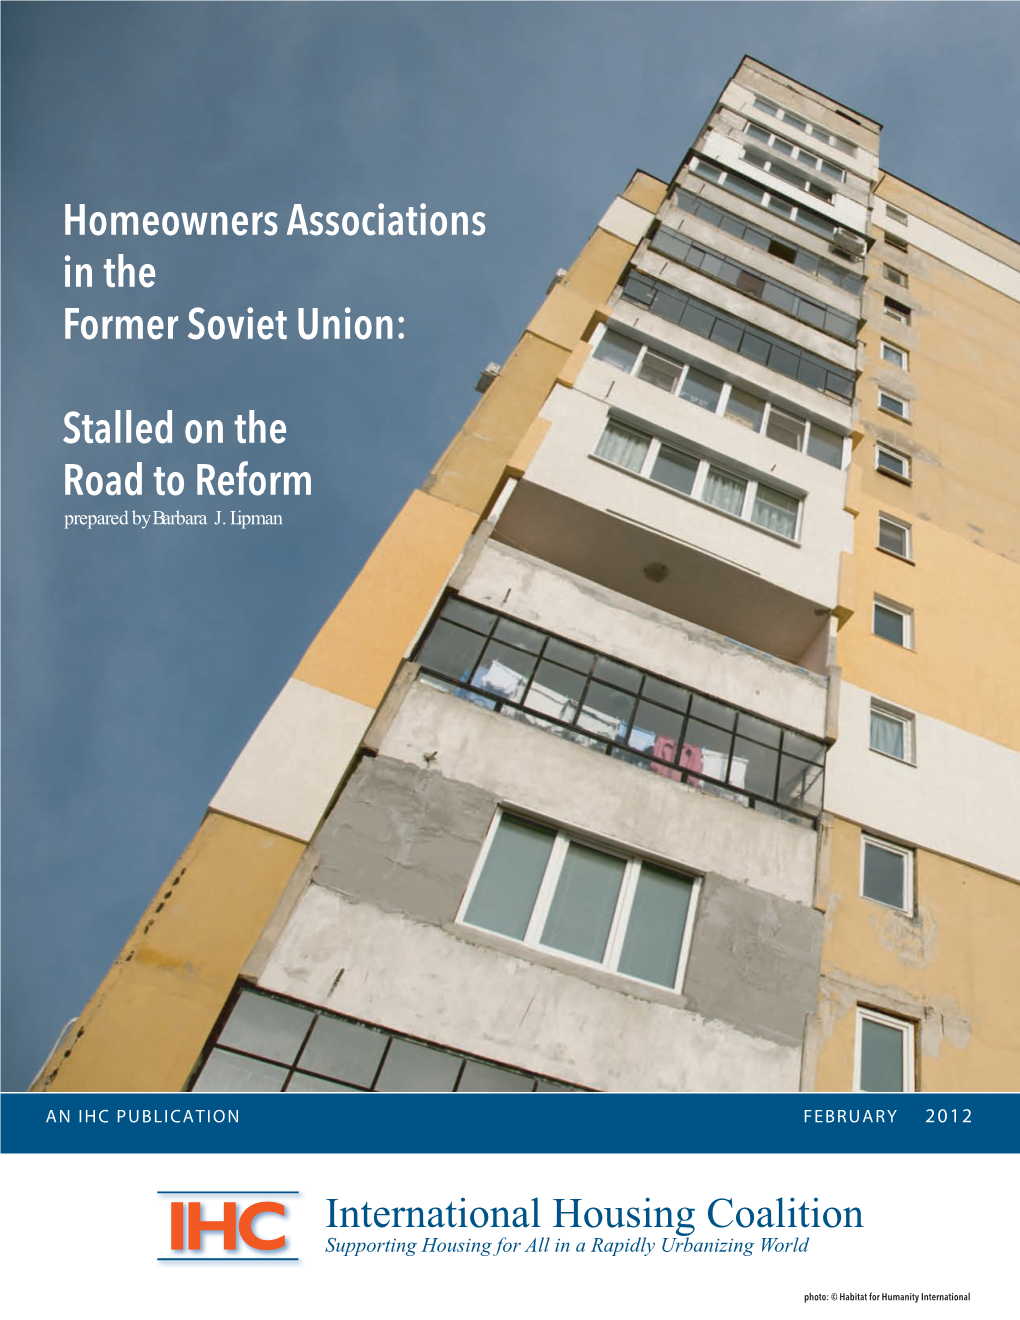 Homeowners Associations in the Former Soviet Union: Stalled on The